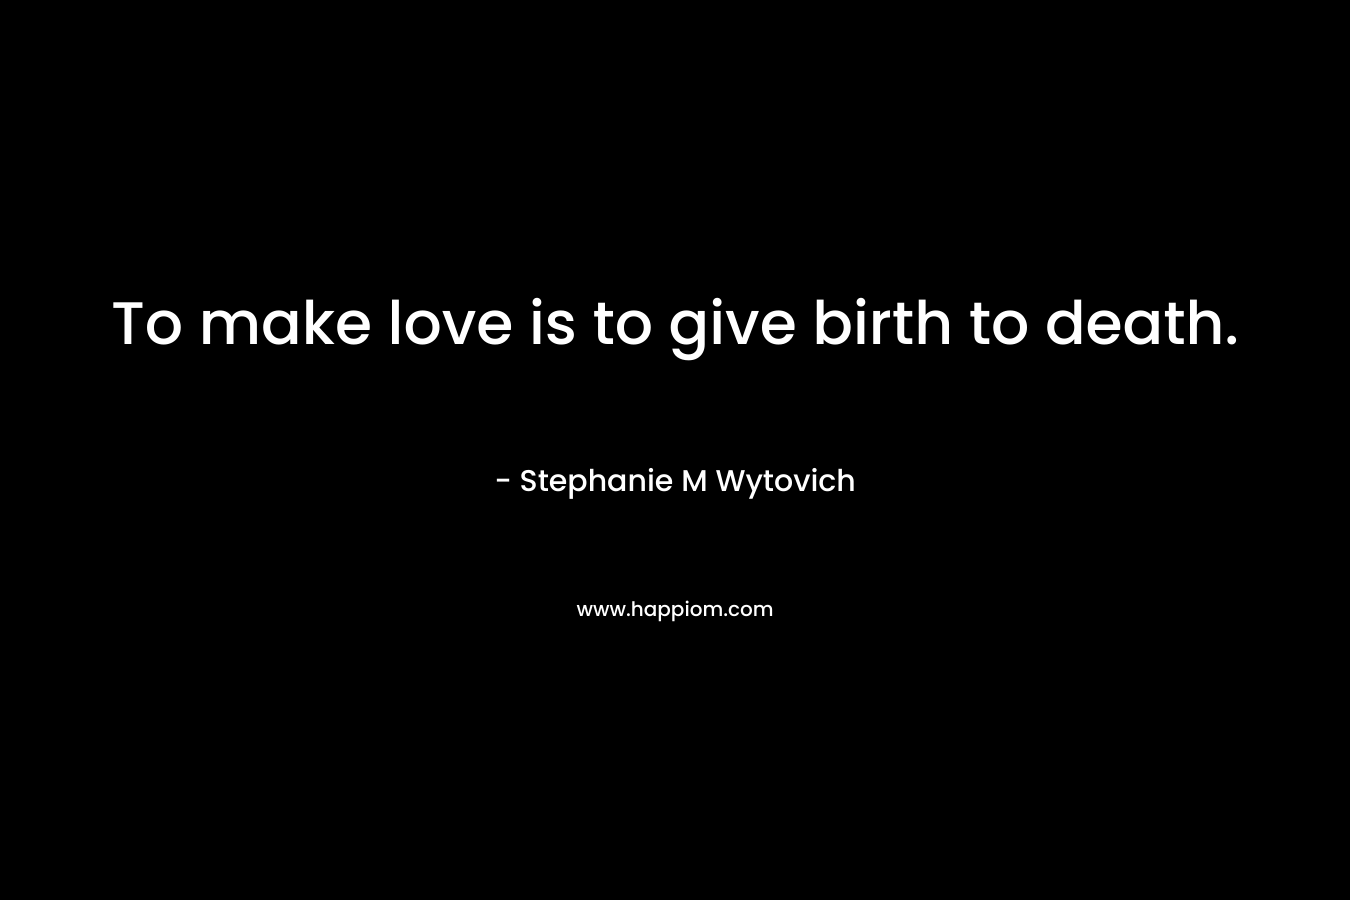 To make love is to give birth to death.